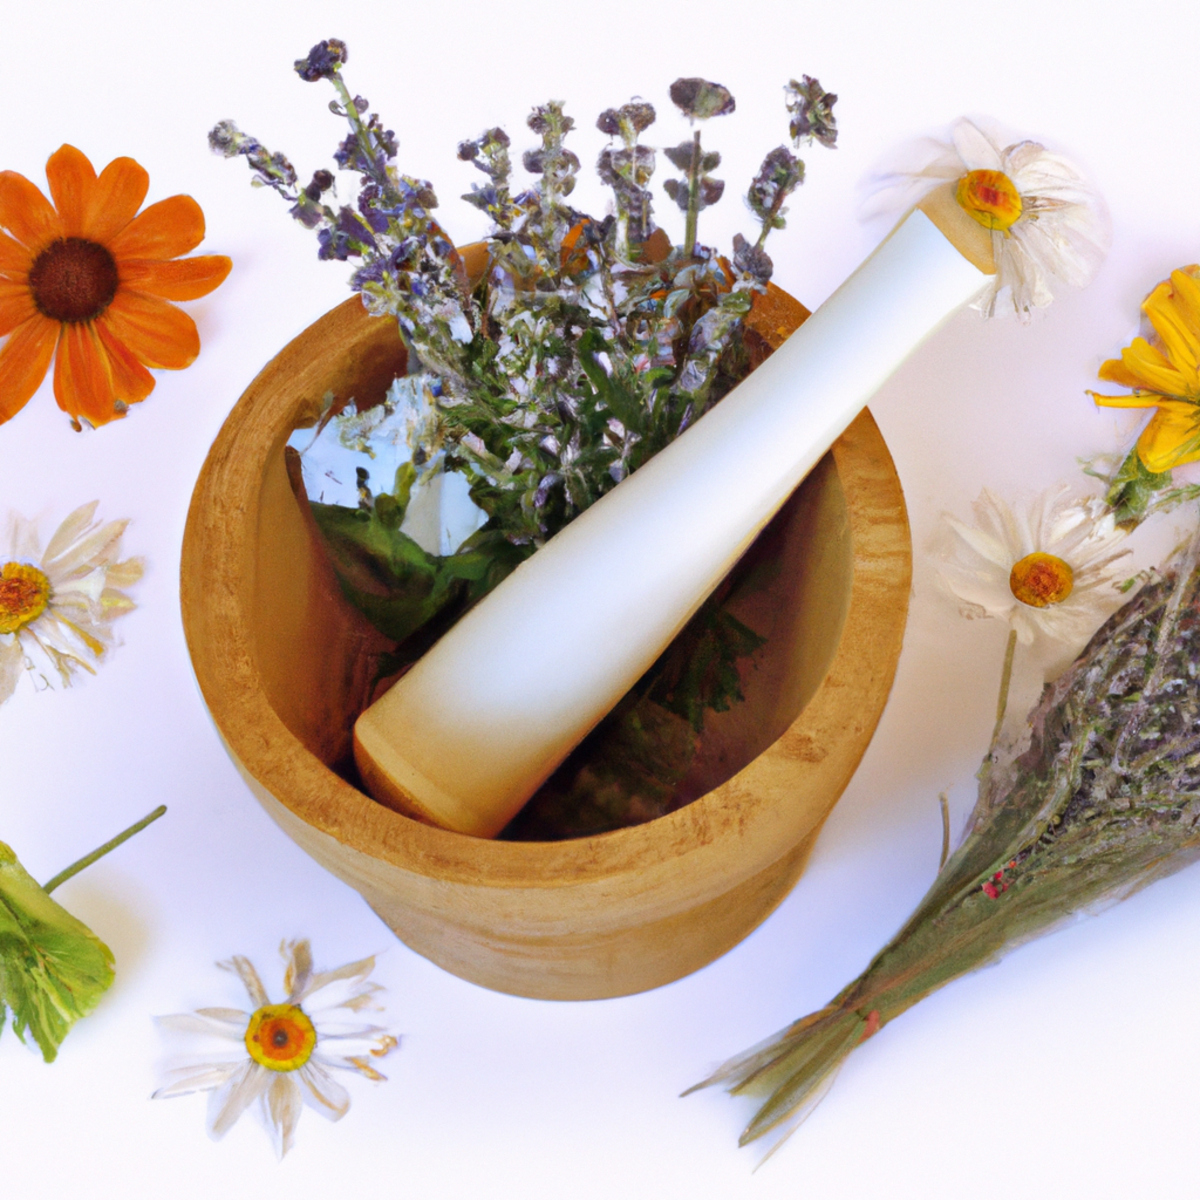 A serene photo of natural beauty remedies: flowers, herbs, honey, almonds, and herbal tea, promoting internal and external wellness.